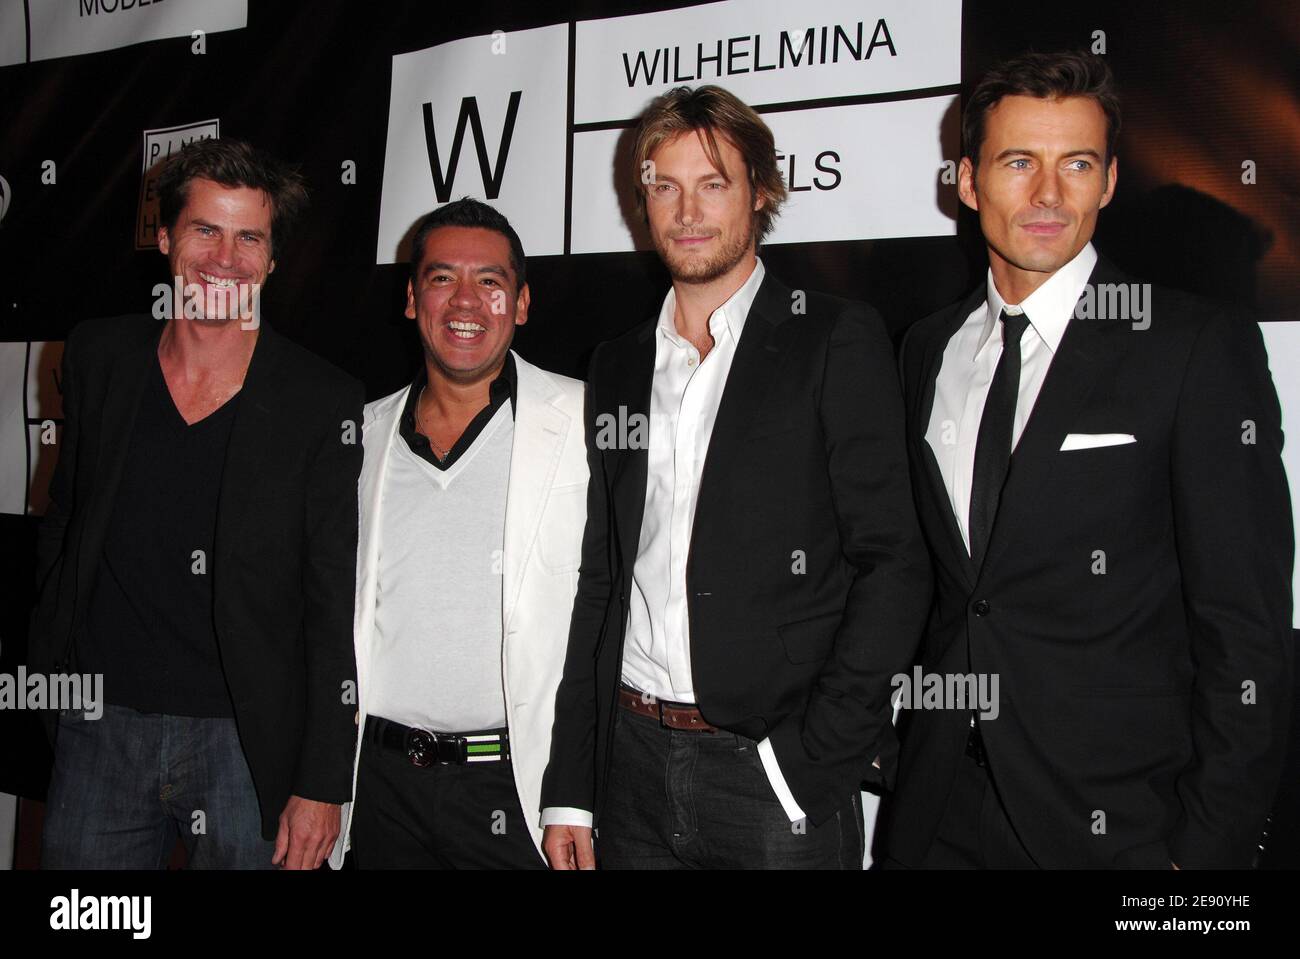 (L-R) Model Mark Vanderloo, President of Wilhelmina Models Sean Patterson, model Gabriel Aubry, and model Alex Lundqvist attend the 40th Anniversary of Wilhelmina Models held at The Angel Orensanz Foundation in New York City, USA on November 29, 2007. Photo by Gregorio Binuya/ABACAUSA.COM (Pictured: Mark Vanderloo, Sean Patterson, Gabriel Aubry, Alex Lundqvist) Stock Photo